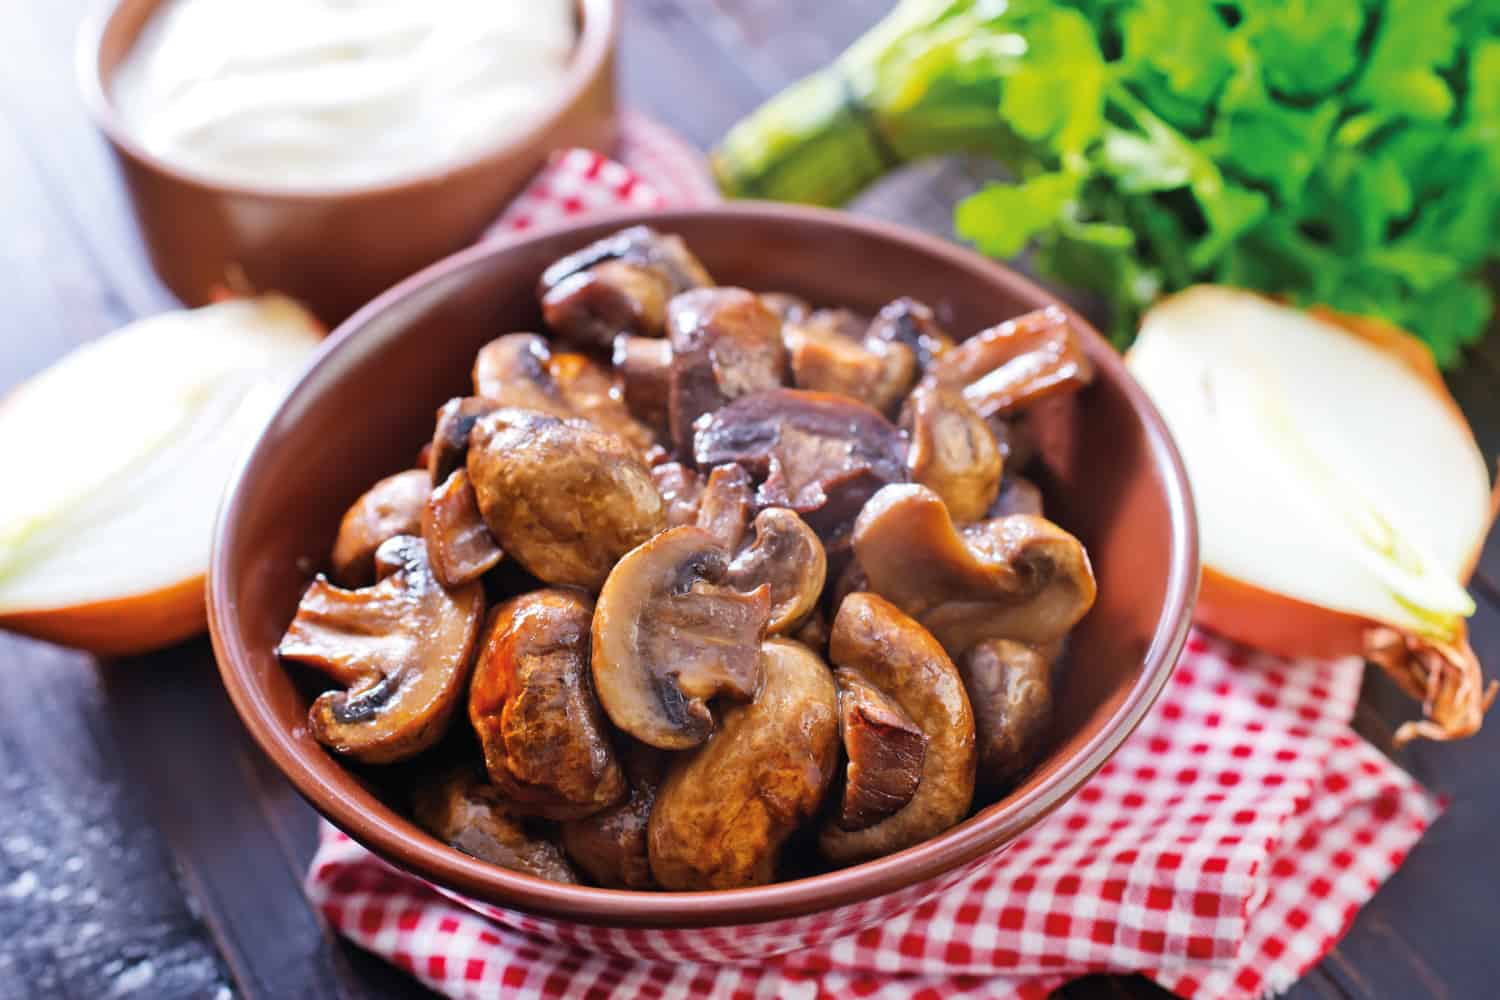 Sauteed button mushrooms on a brown bowl on top of table